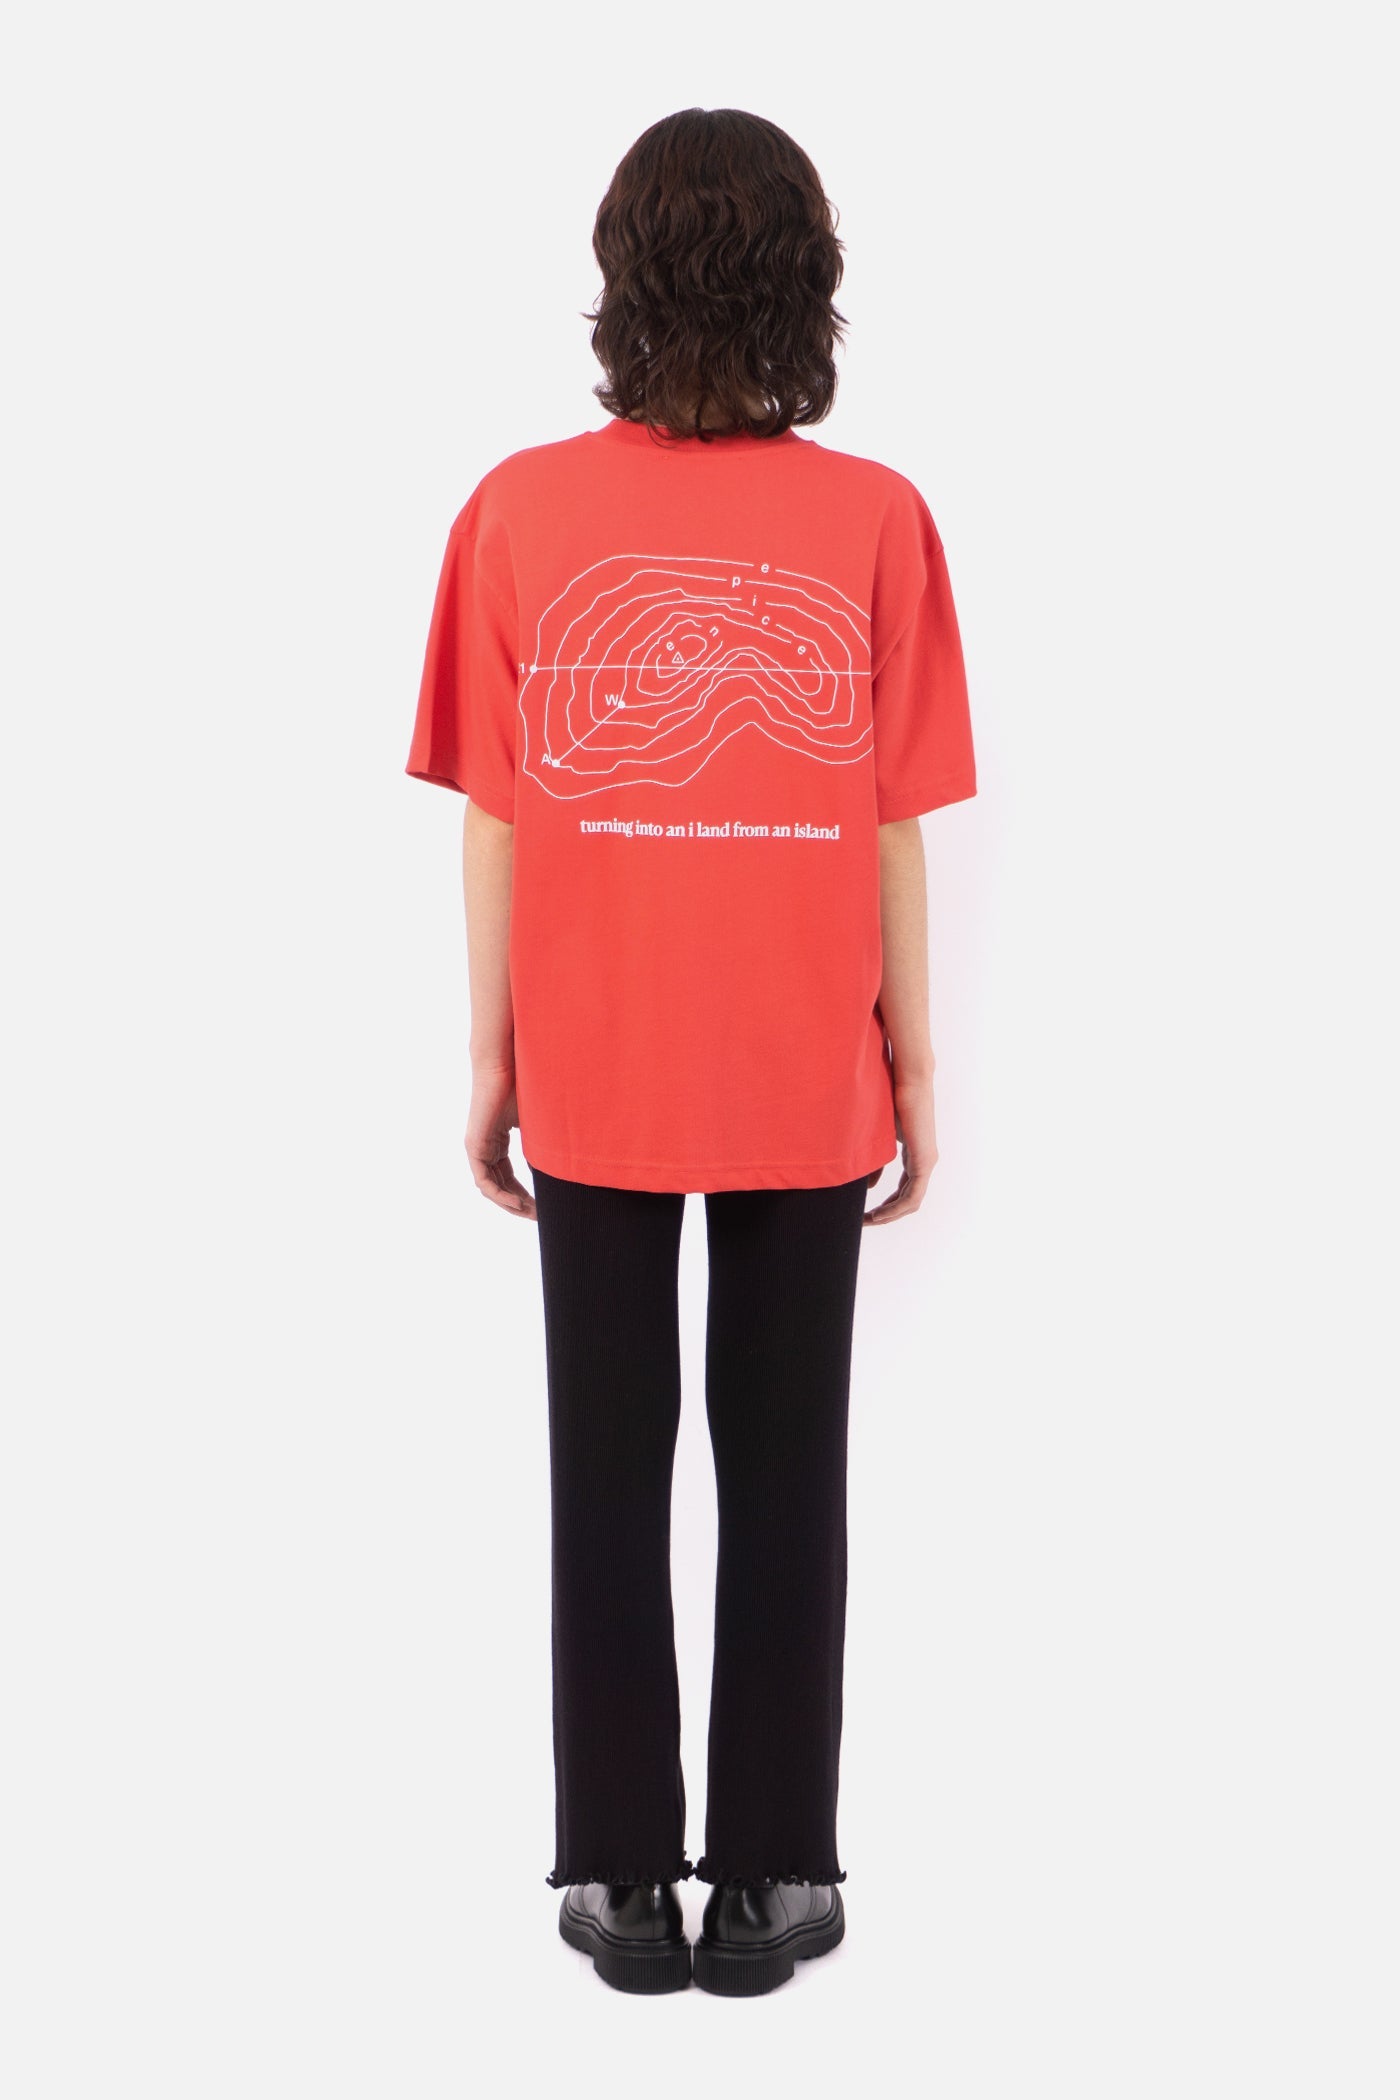 TOPOGRAPHY T-SHIRT